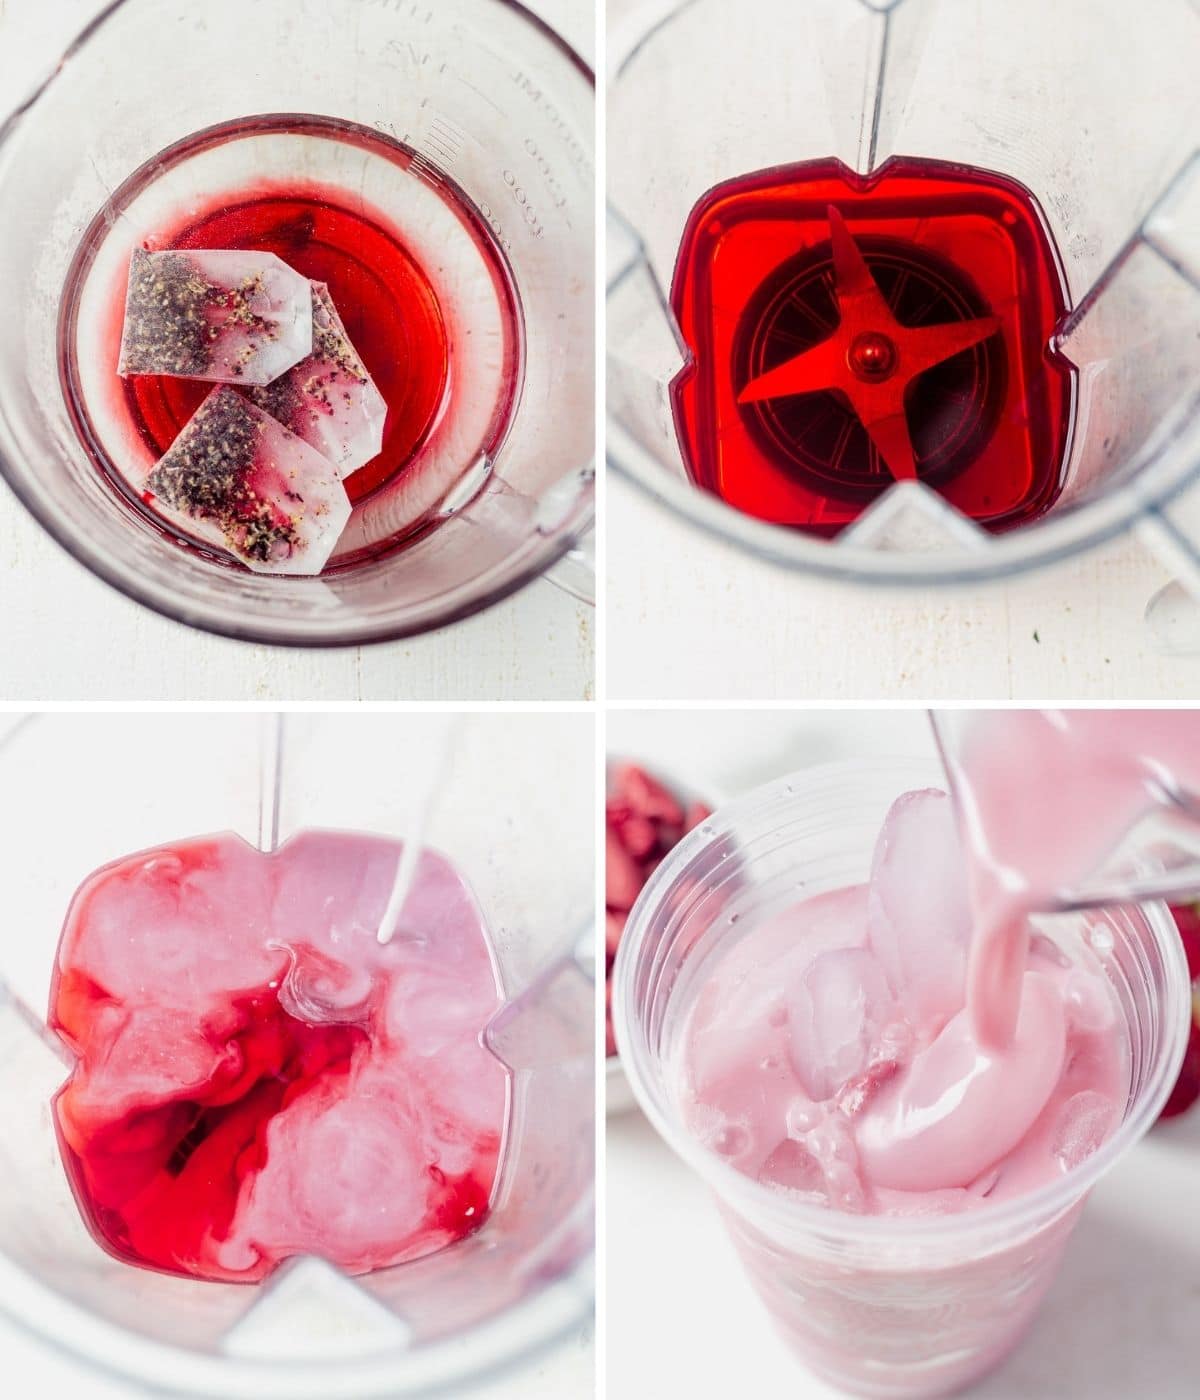 4 images showing how to make a pink drink in a few steps including steeping the tea, blending the ingredients and pouring over ice